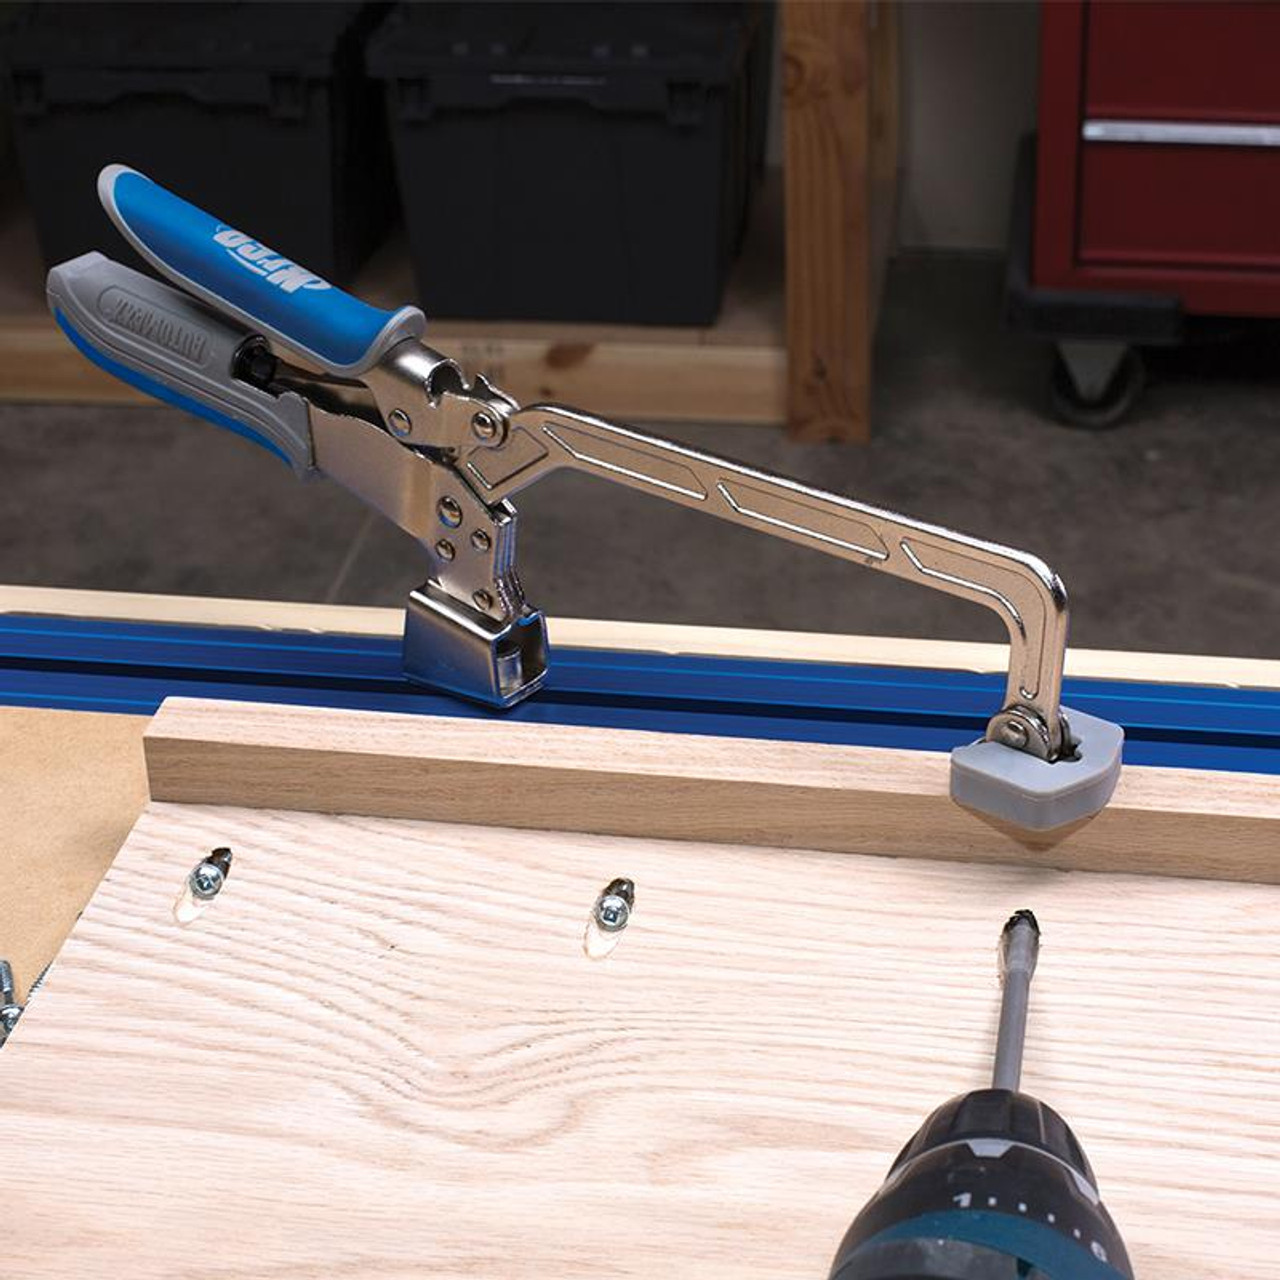 Kreg Bench Clamp with Bench Clamp Base Package